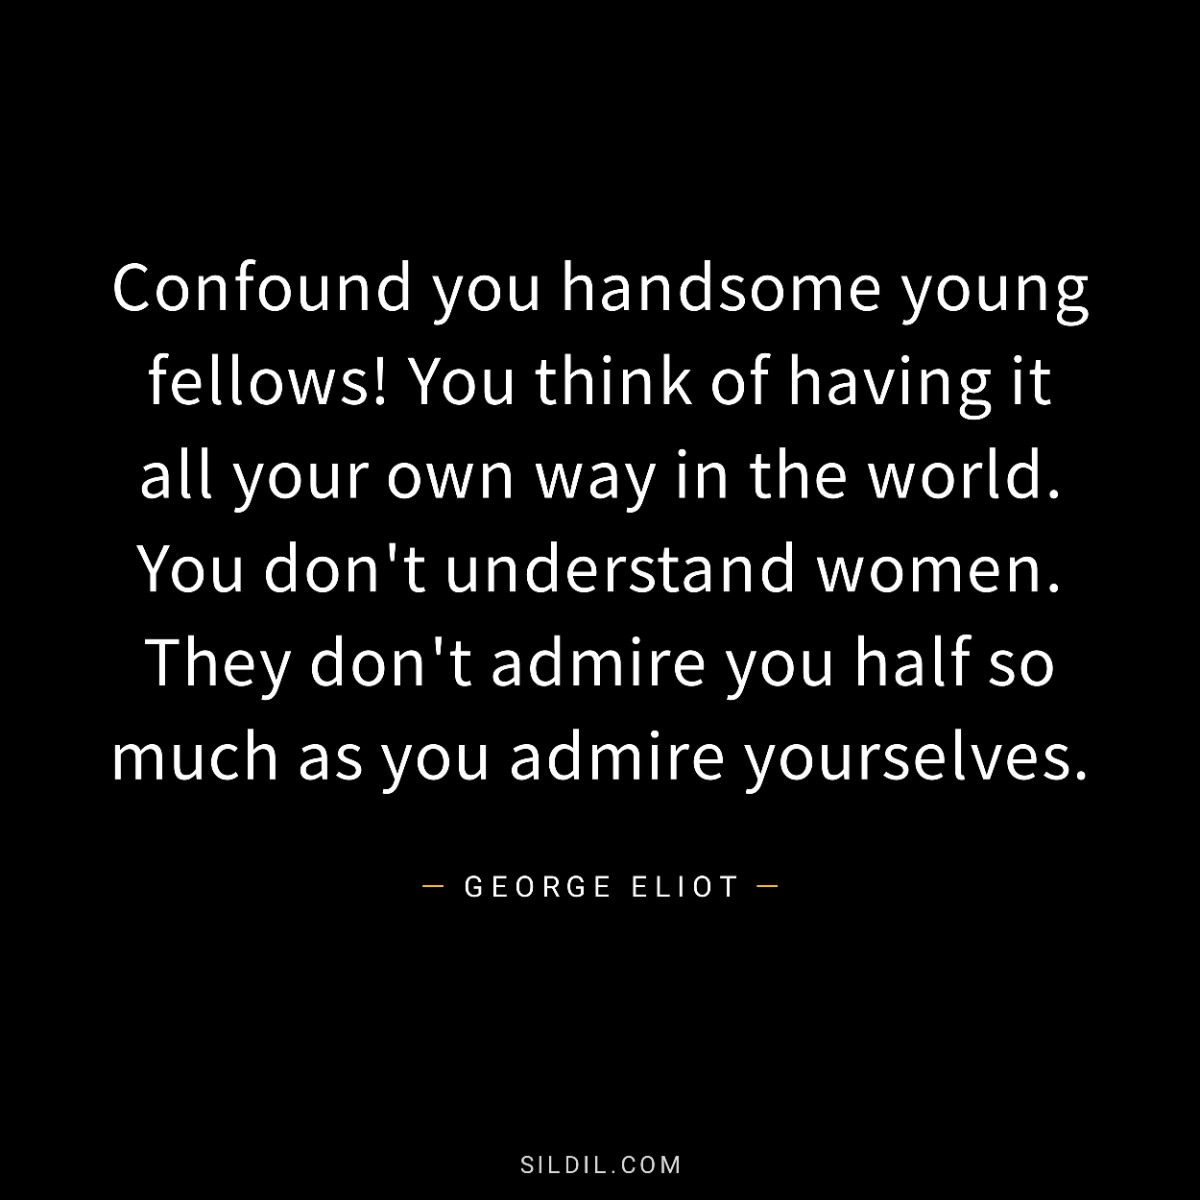 Confound you handsome young fellows! You think of having it all your own way in the world. You don't understand women. They don't admire you half so much as you admire yourselves.